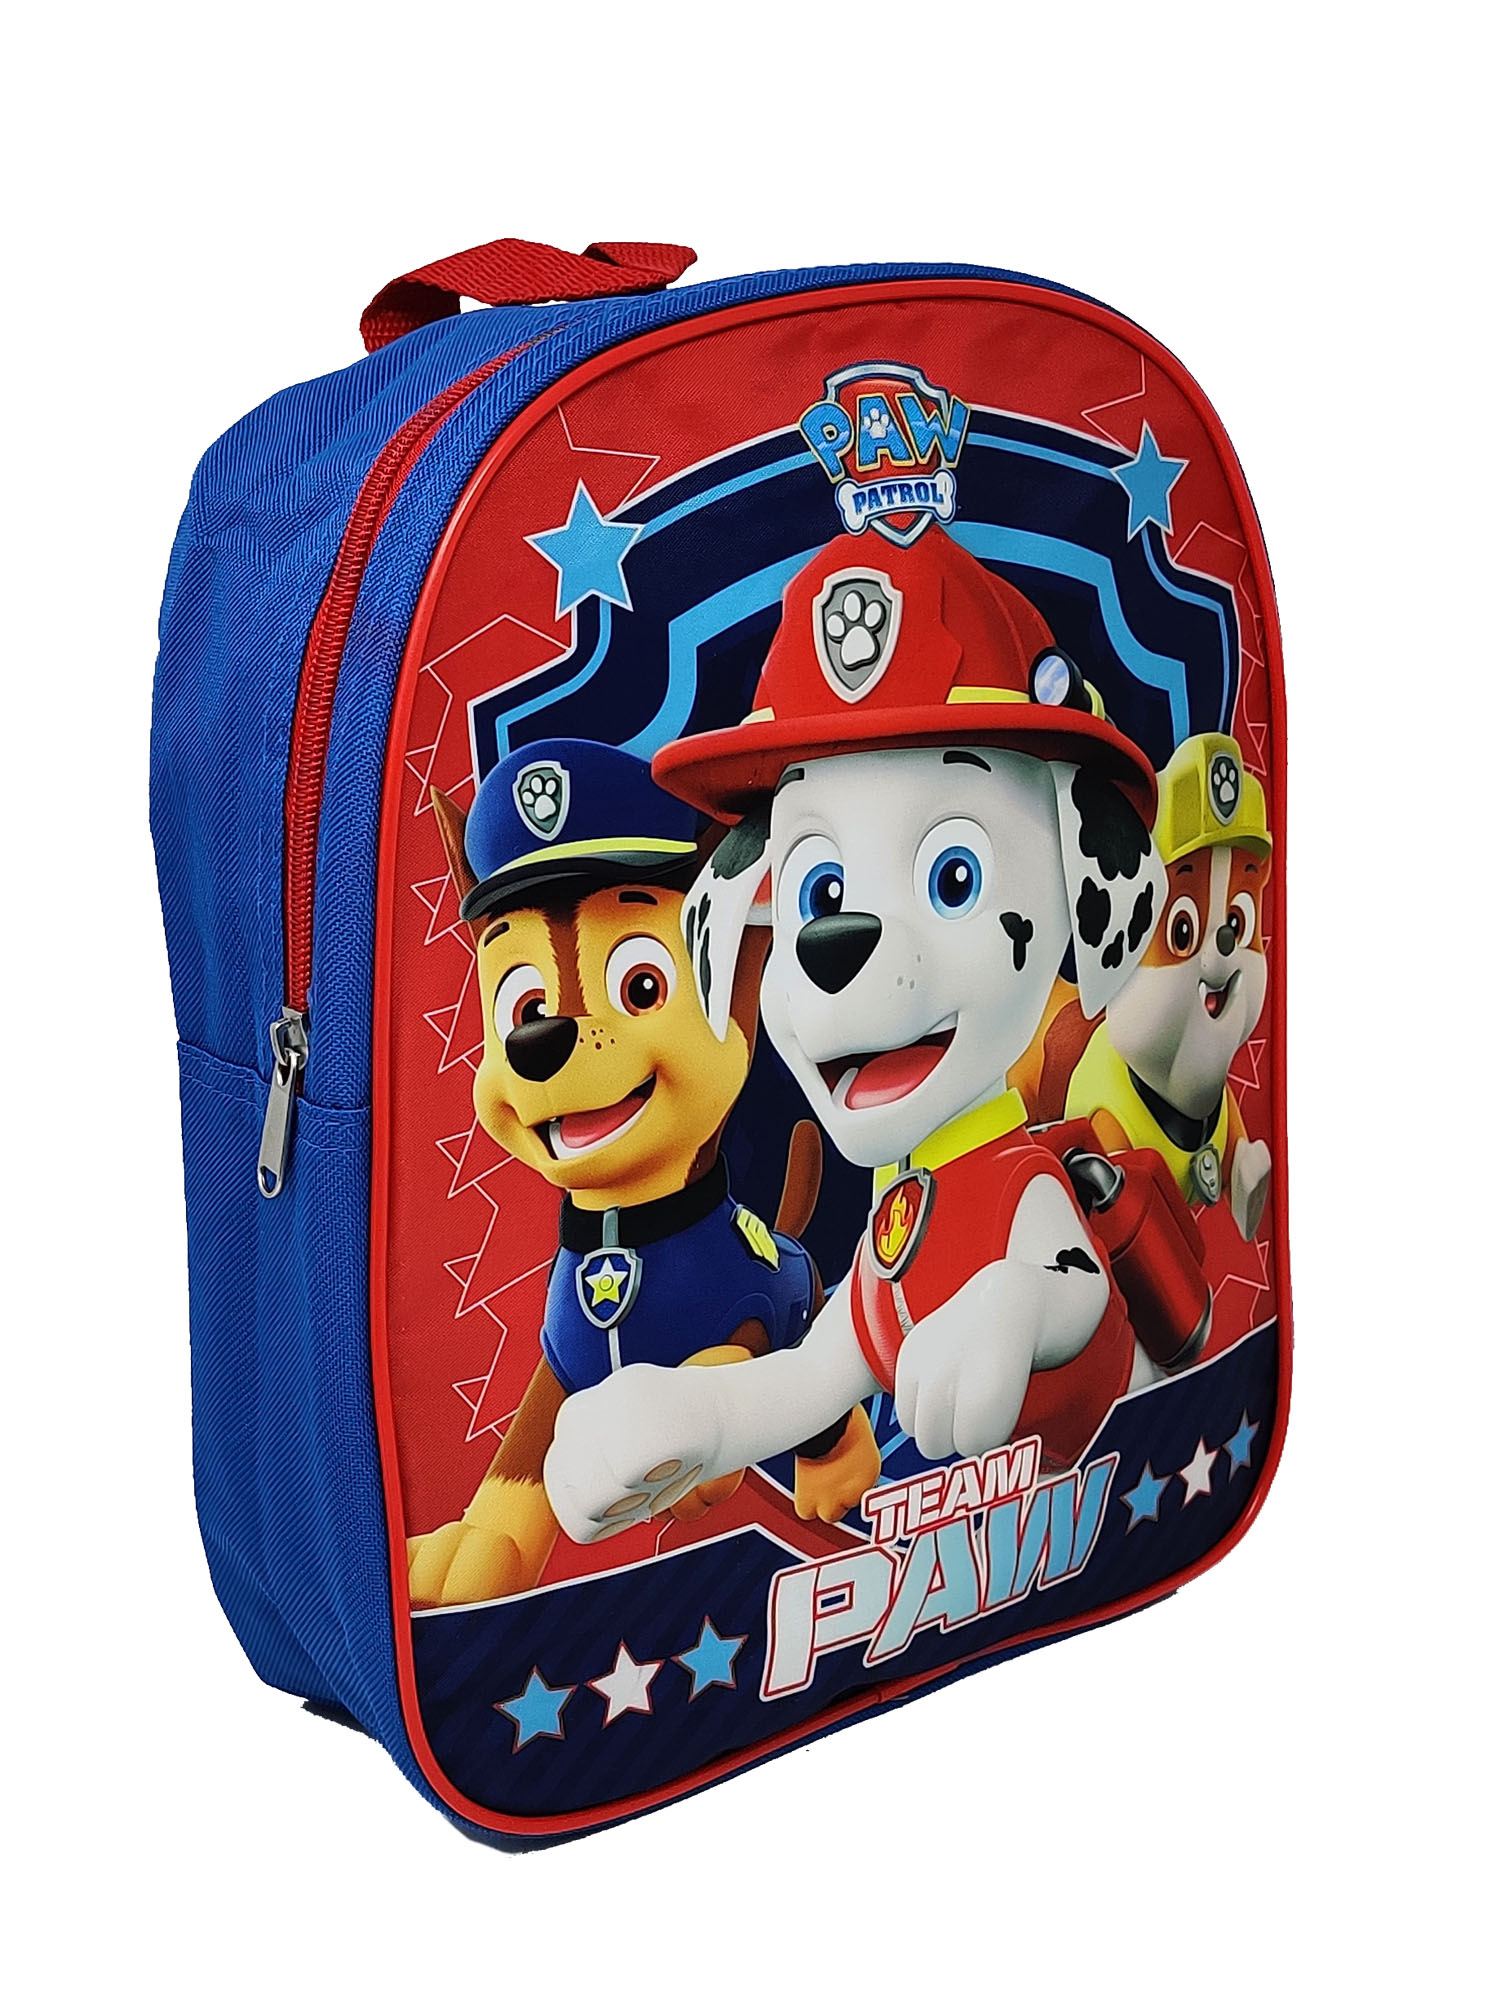 Paw Patrol Backpack 12" Mini Toddler Marshall Chase Rubble Boys Blue Red - image 3 of 3